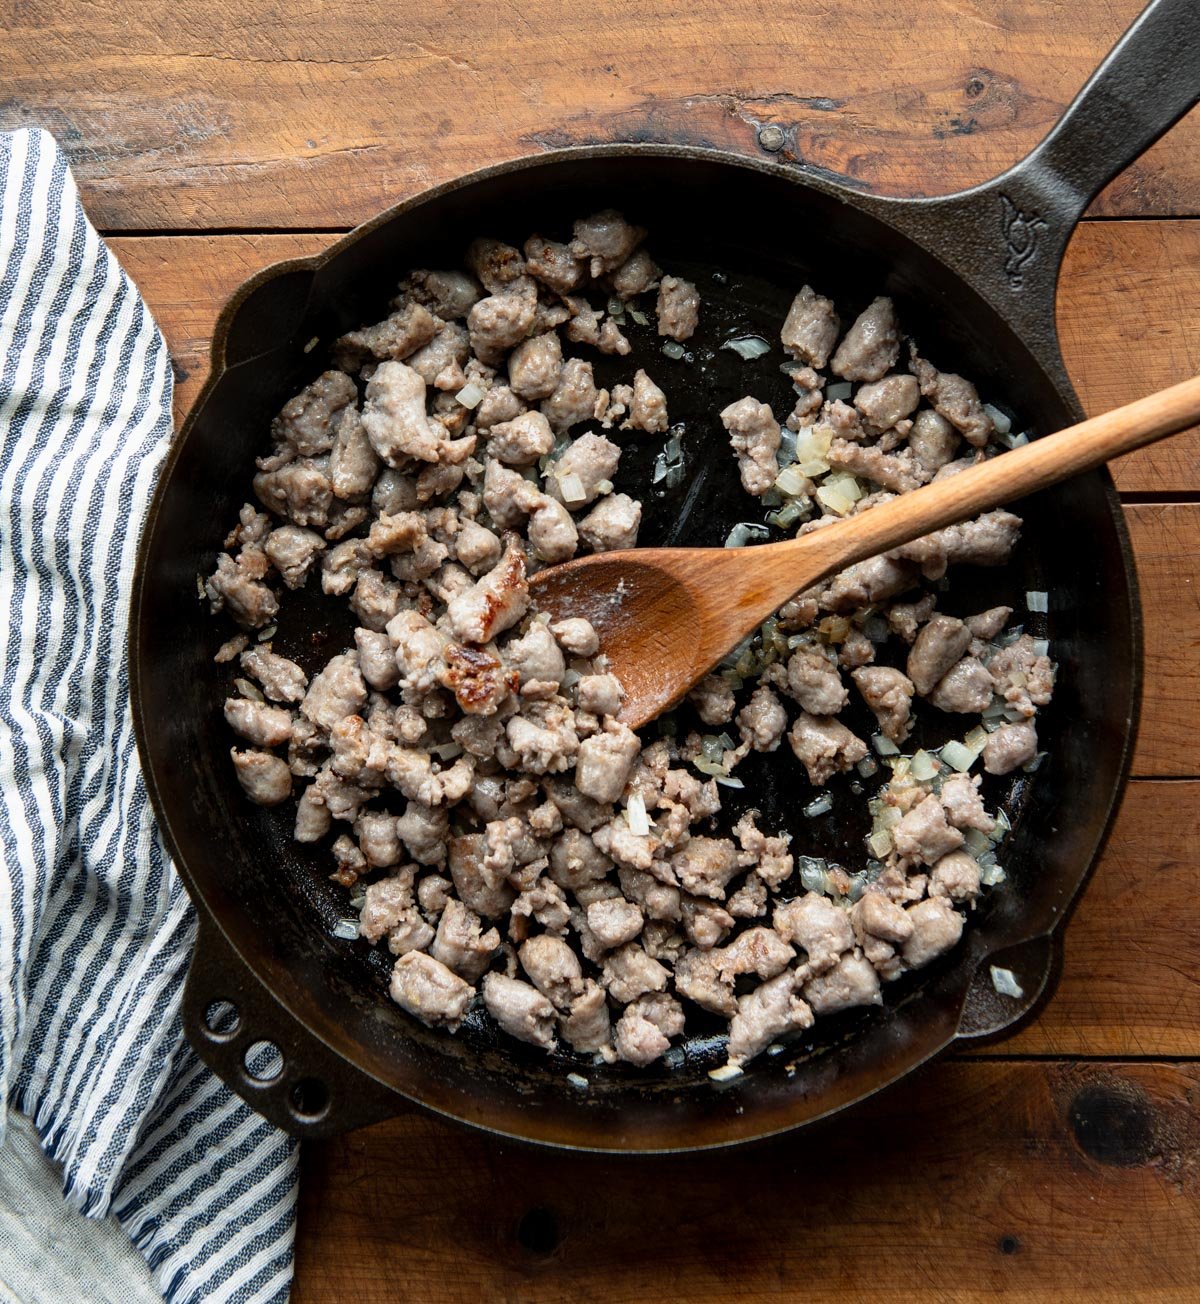 Browning maple breakfast sausage in a skillet.